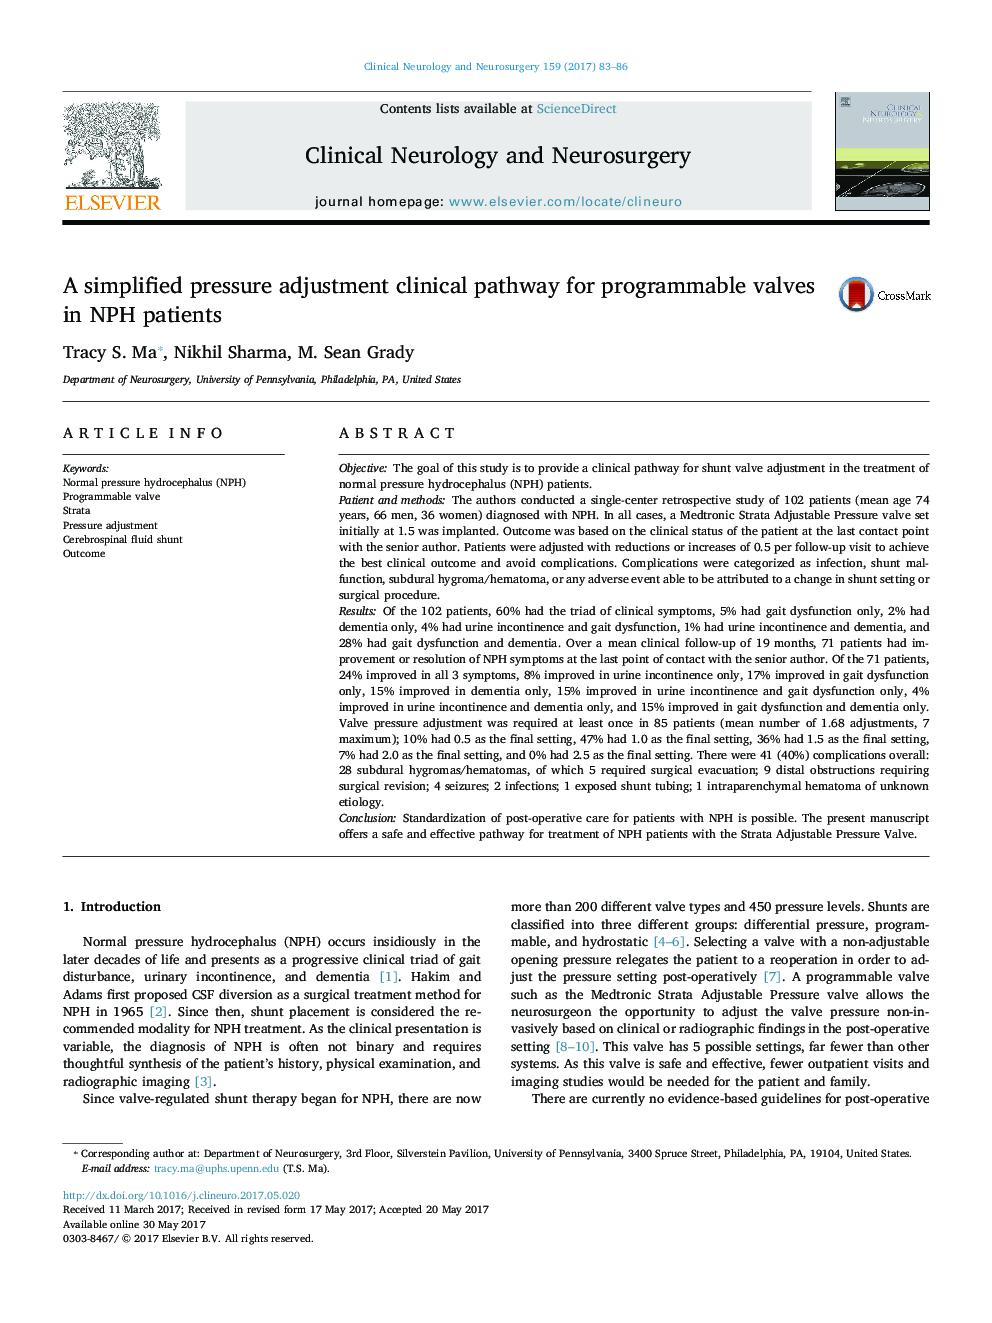 A simplified pressure adjustment clinical pathway for programmable valves in NPH patients